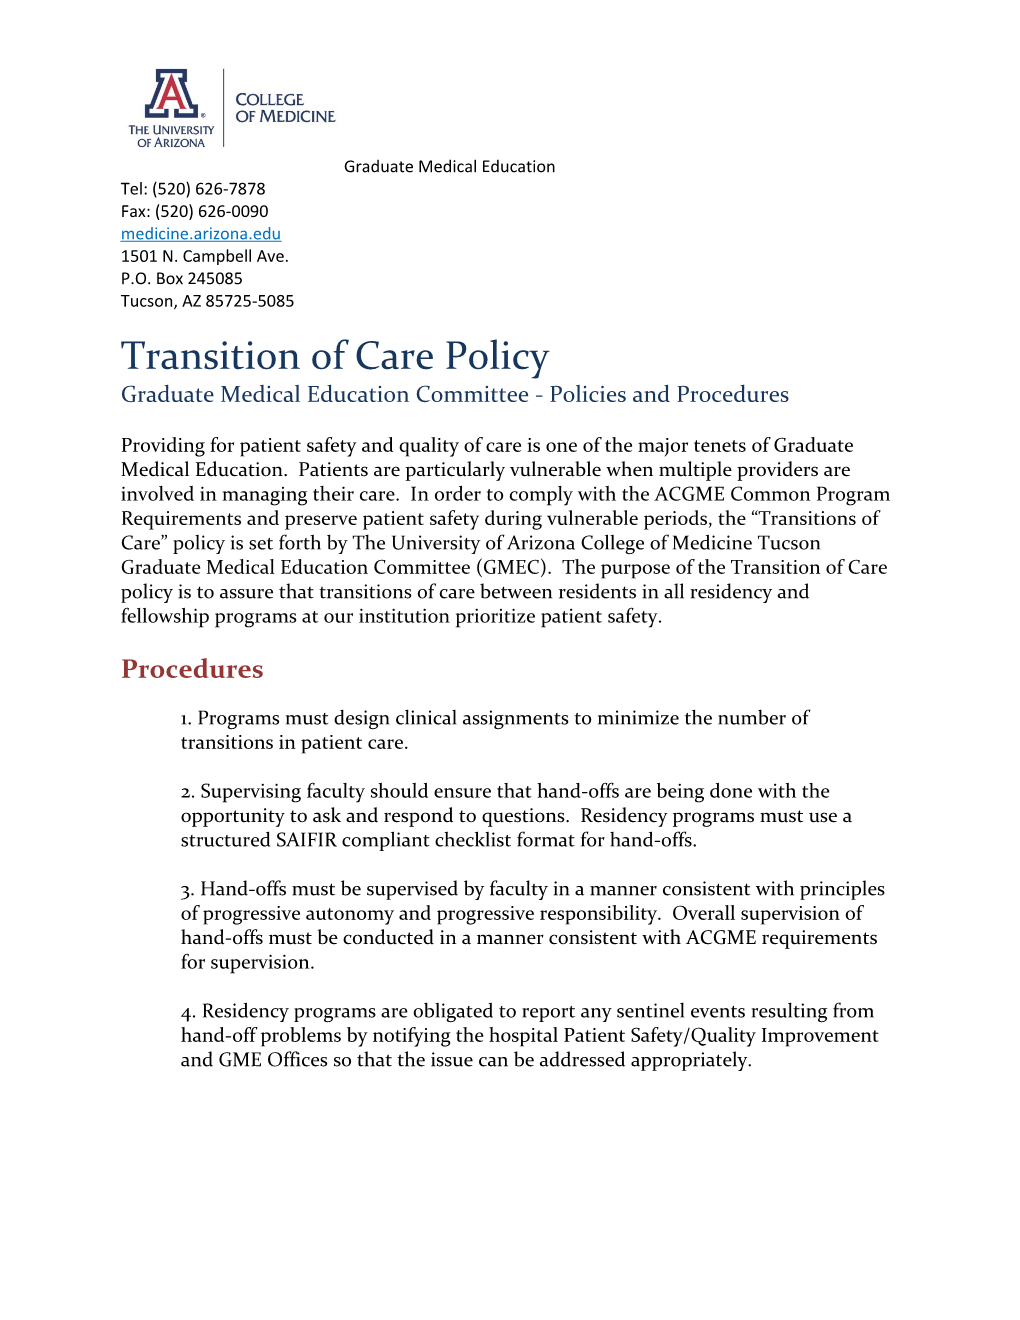 Graduate Medical Education Committee - Policies and Procedures